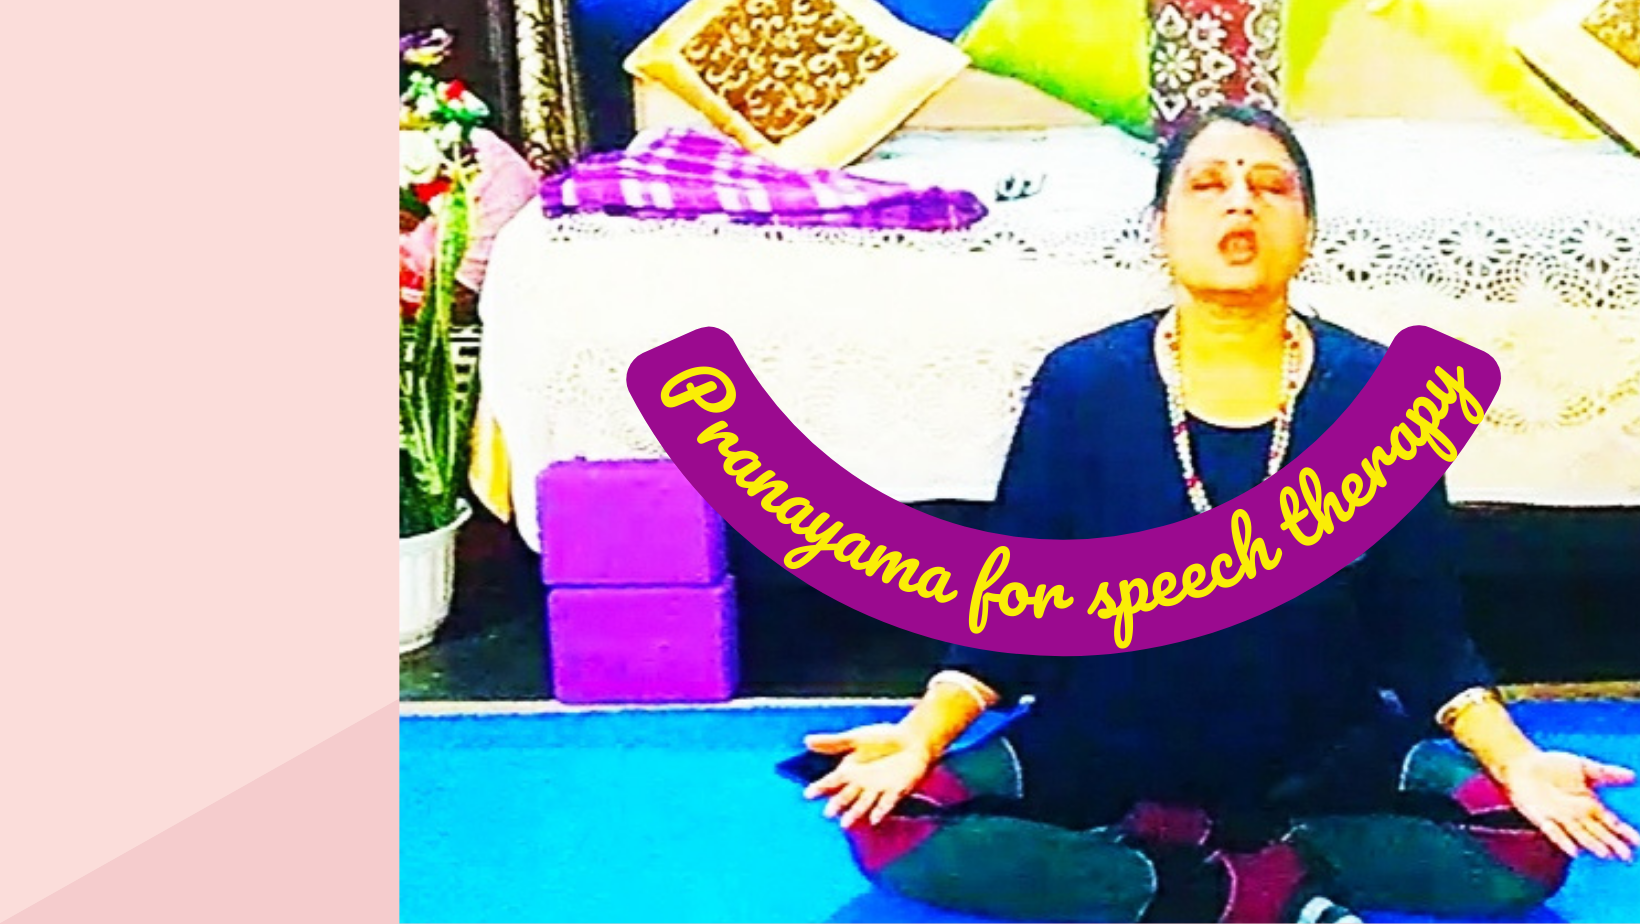 Featured image: Yoga kriyas and Pranayam for speech therapy